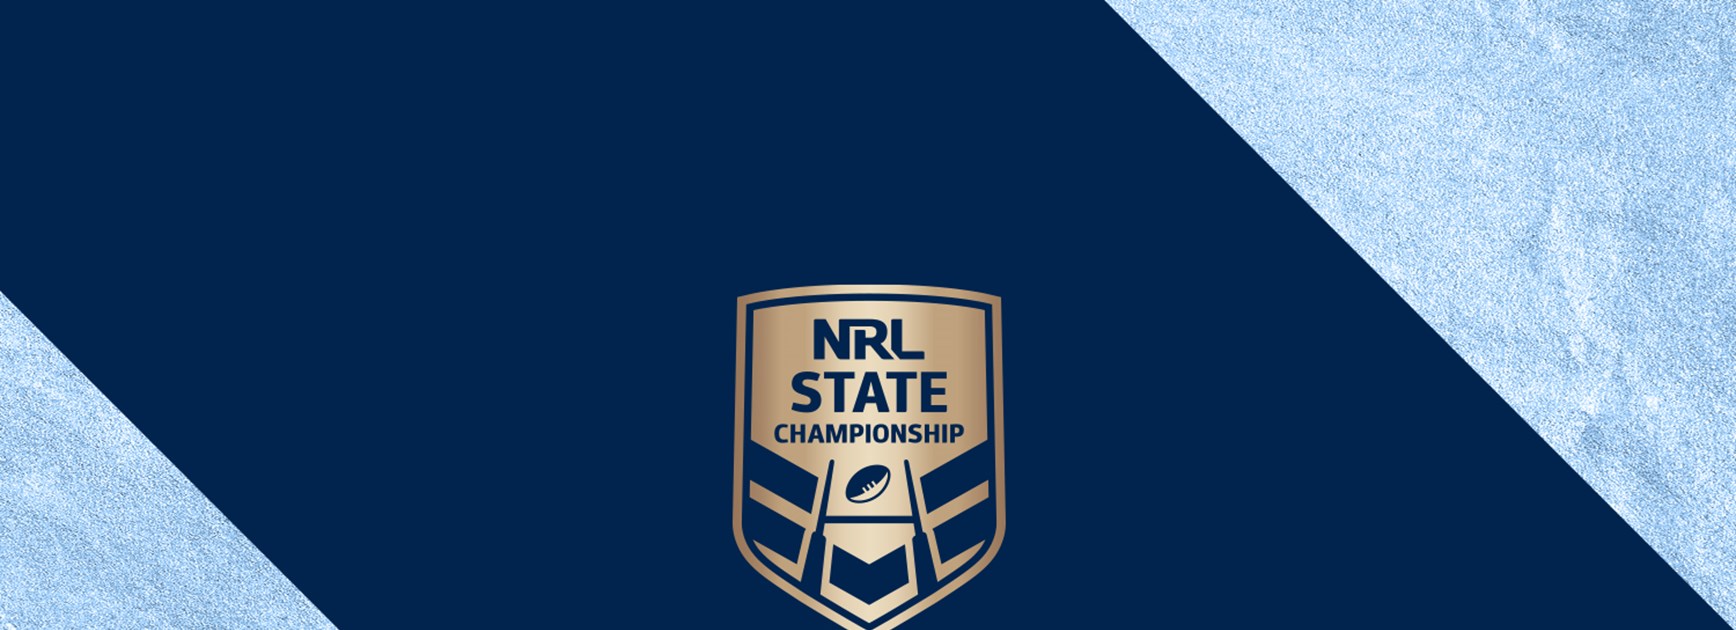 Finals team lists for NRL State Championship are in